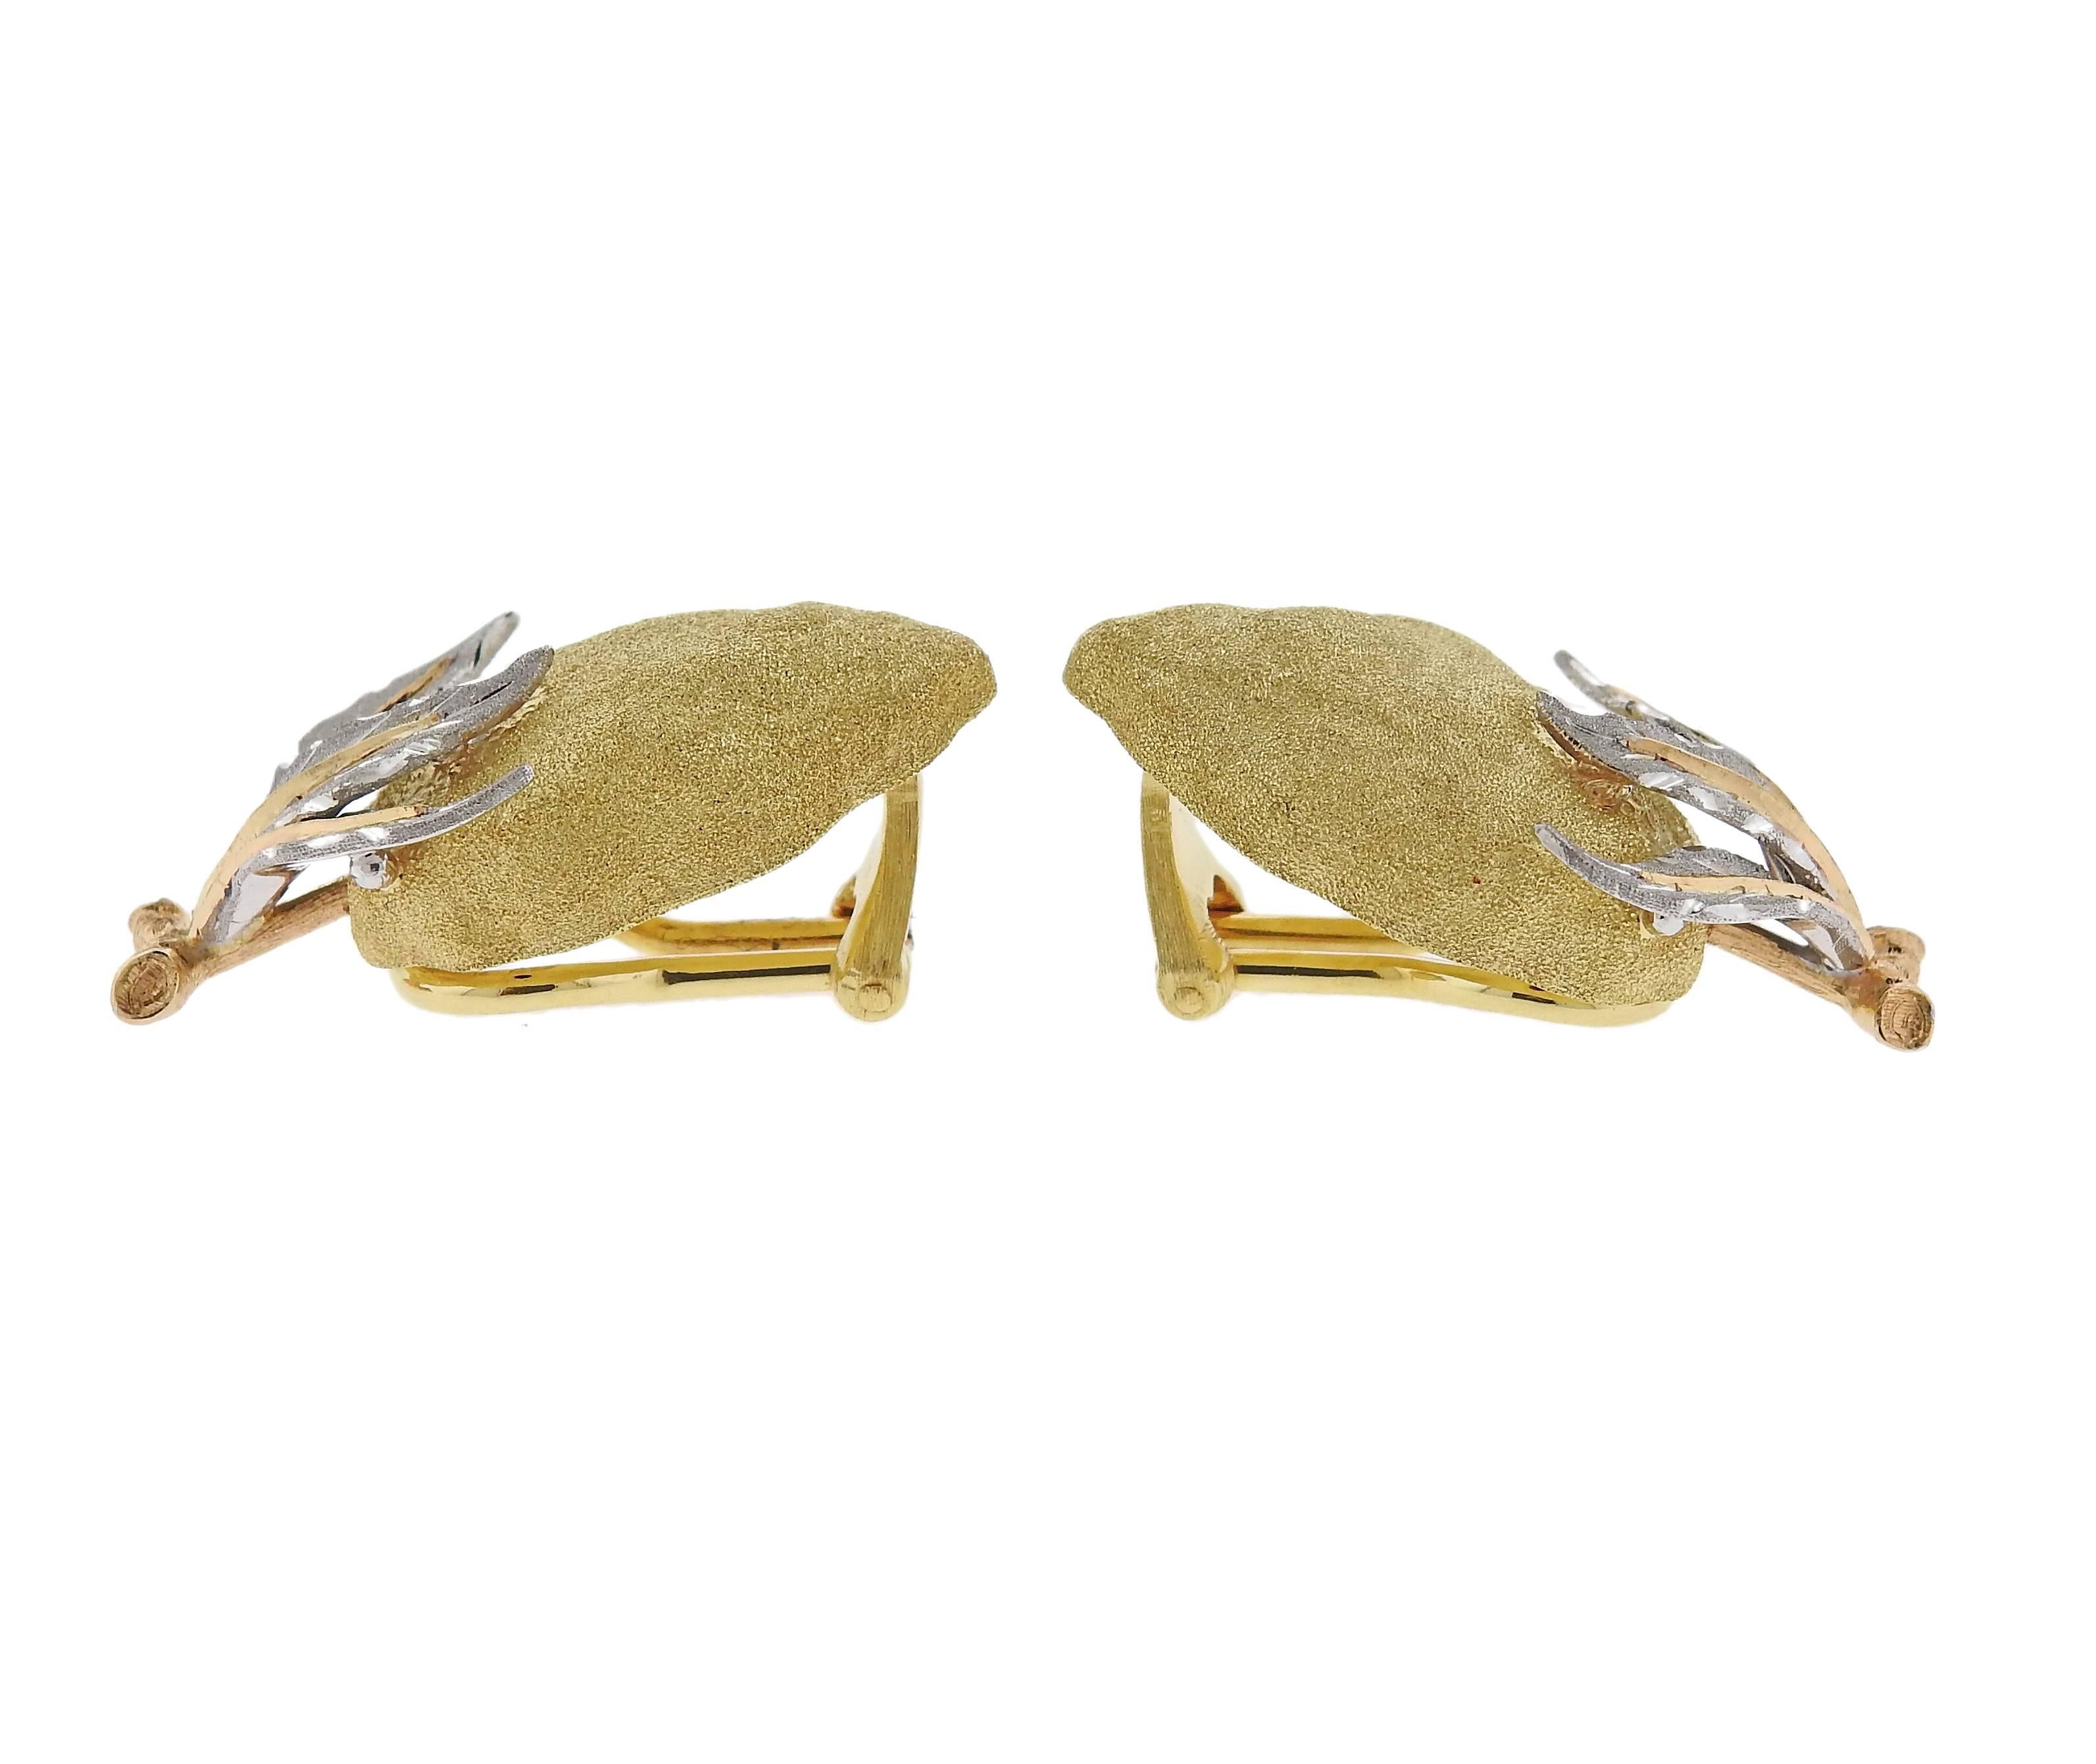 A pair of 18k rose, white and yellow gold earrings, crafted by Buccellati, featuring lemons. Earrings are 29mm x 15mm. Marked: Buccellati, 750, G4033, Italy. Weight - 16 grams.
Come with pouch. Retail $11100. 